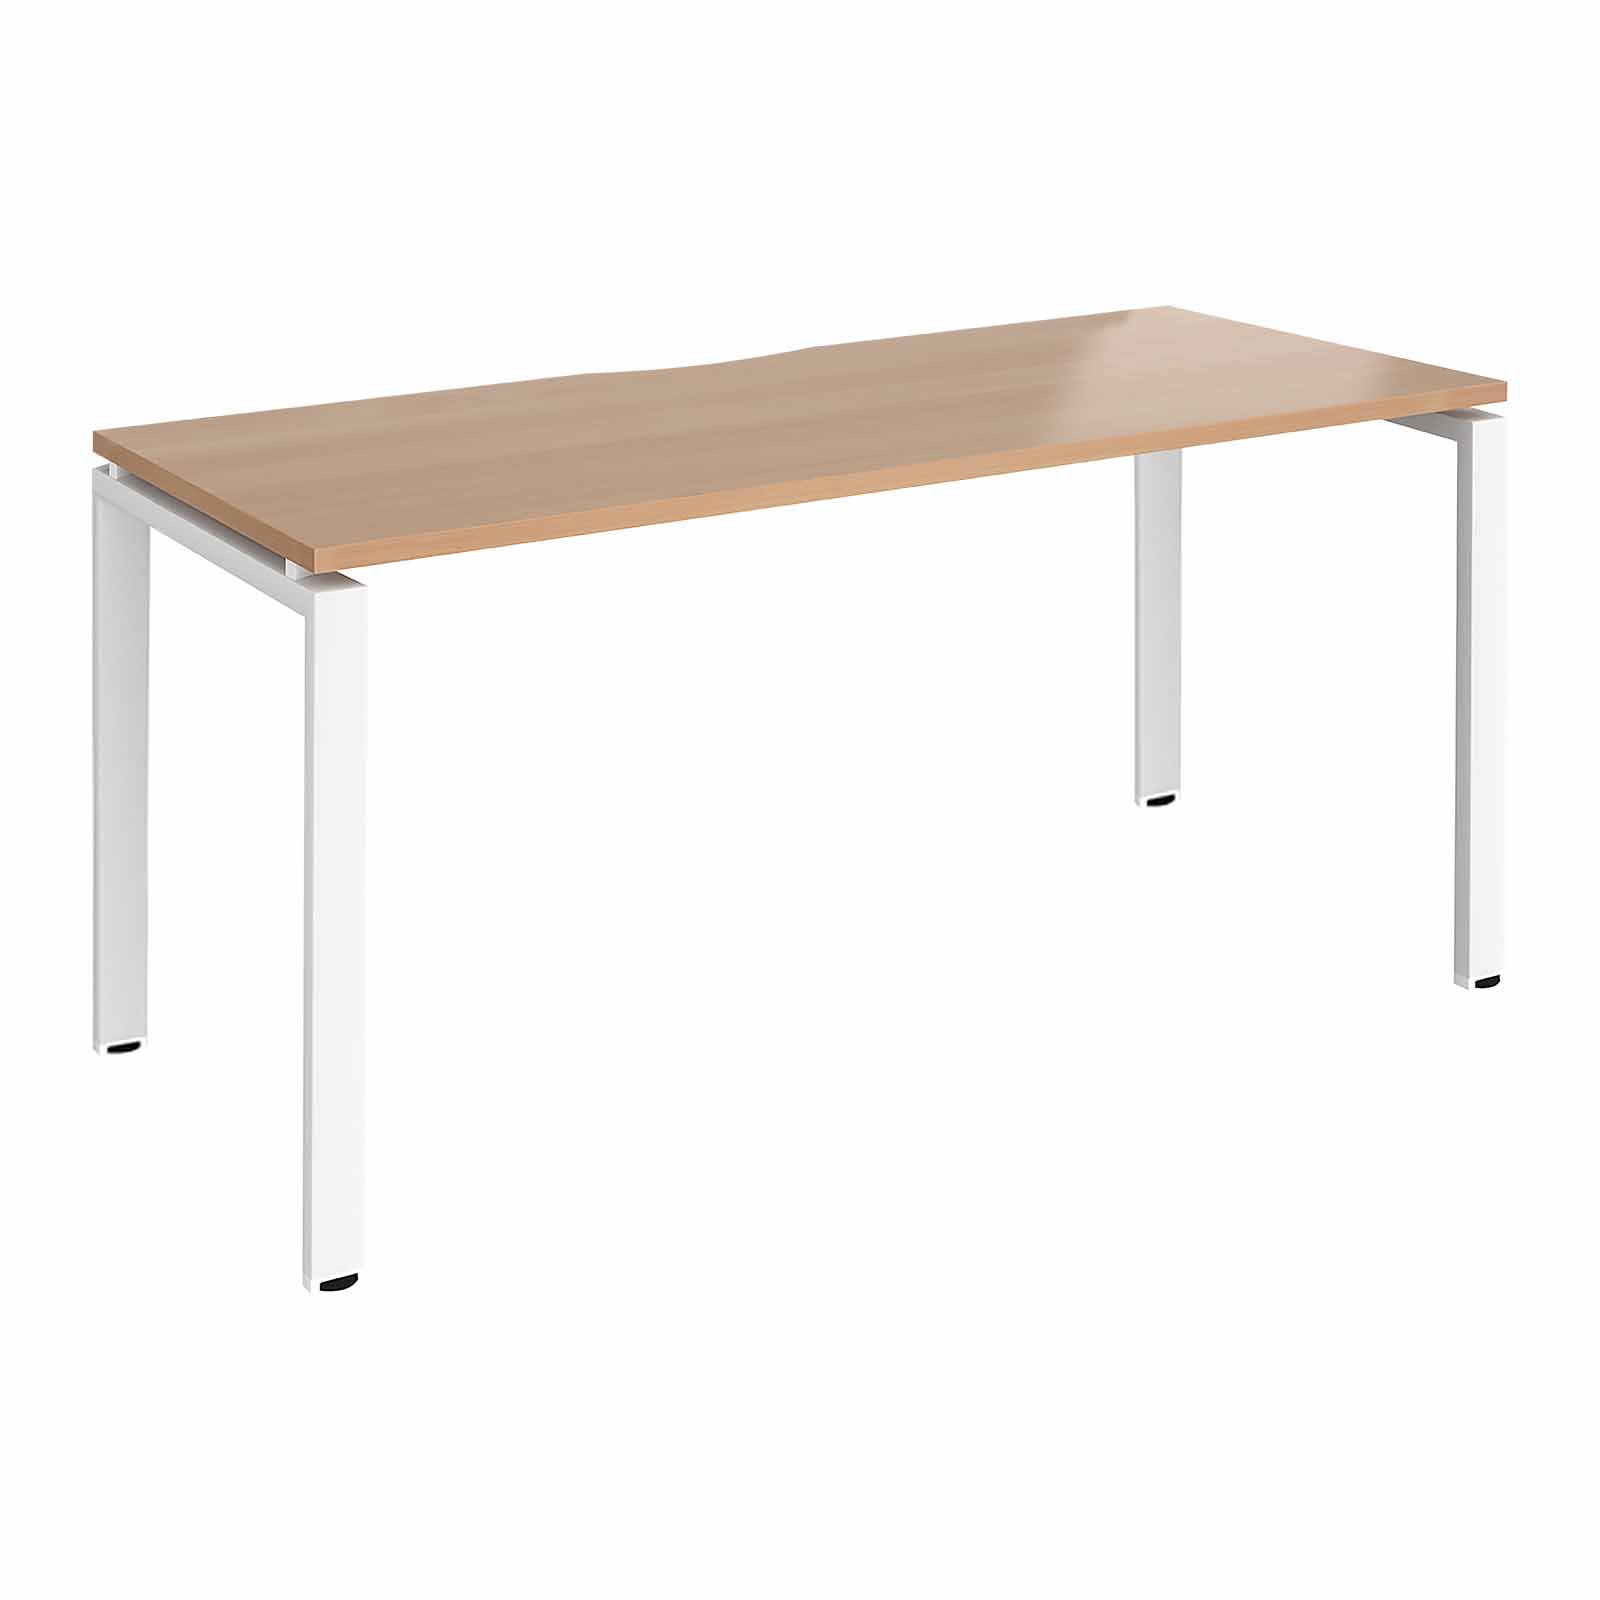 MADE TO ORDER Single Row Bench Desk